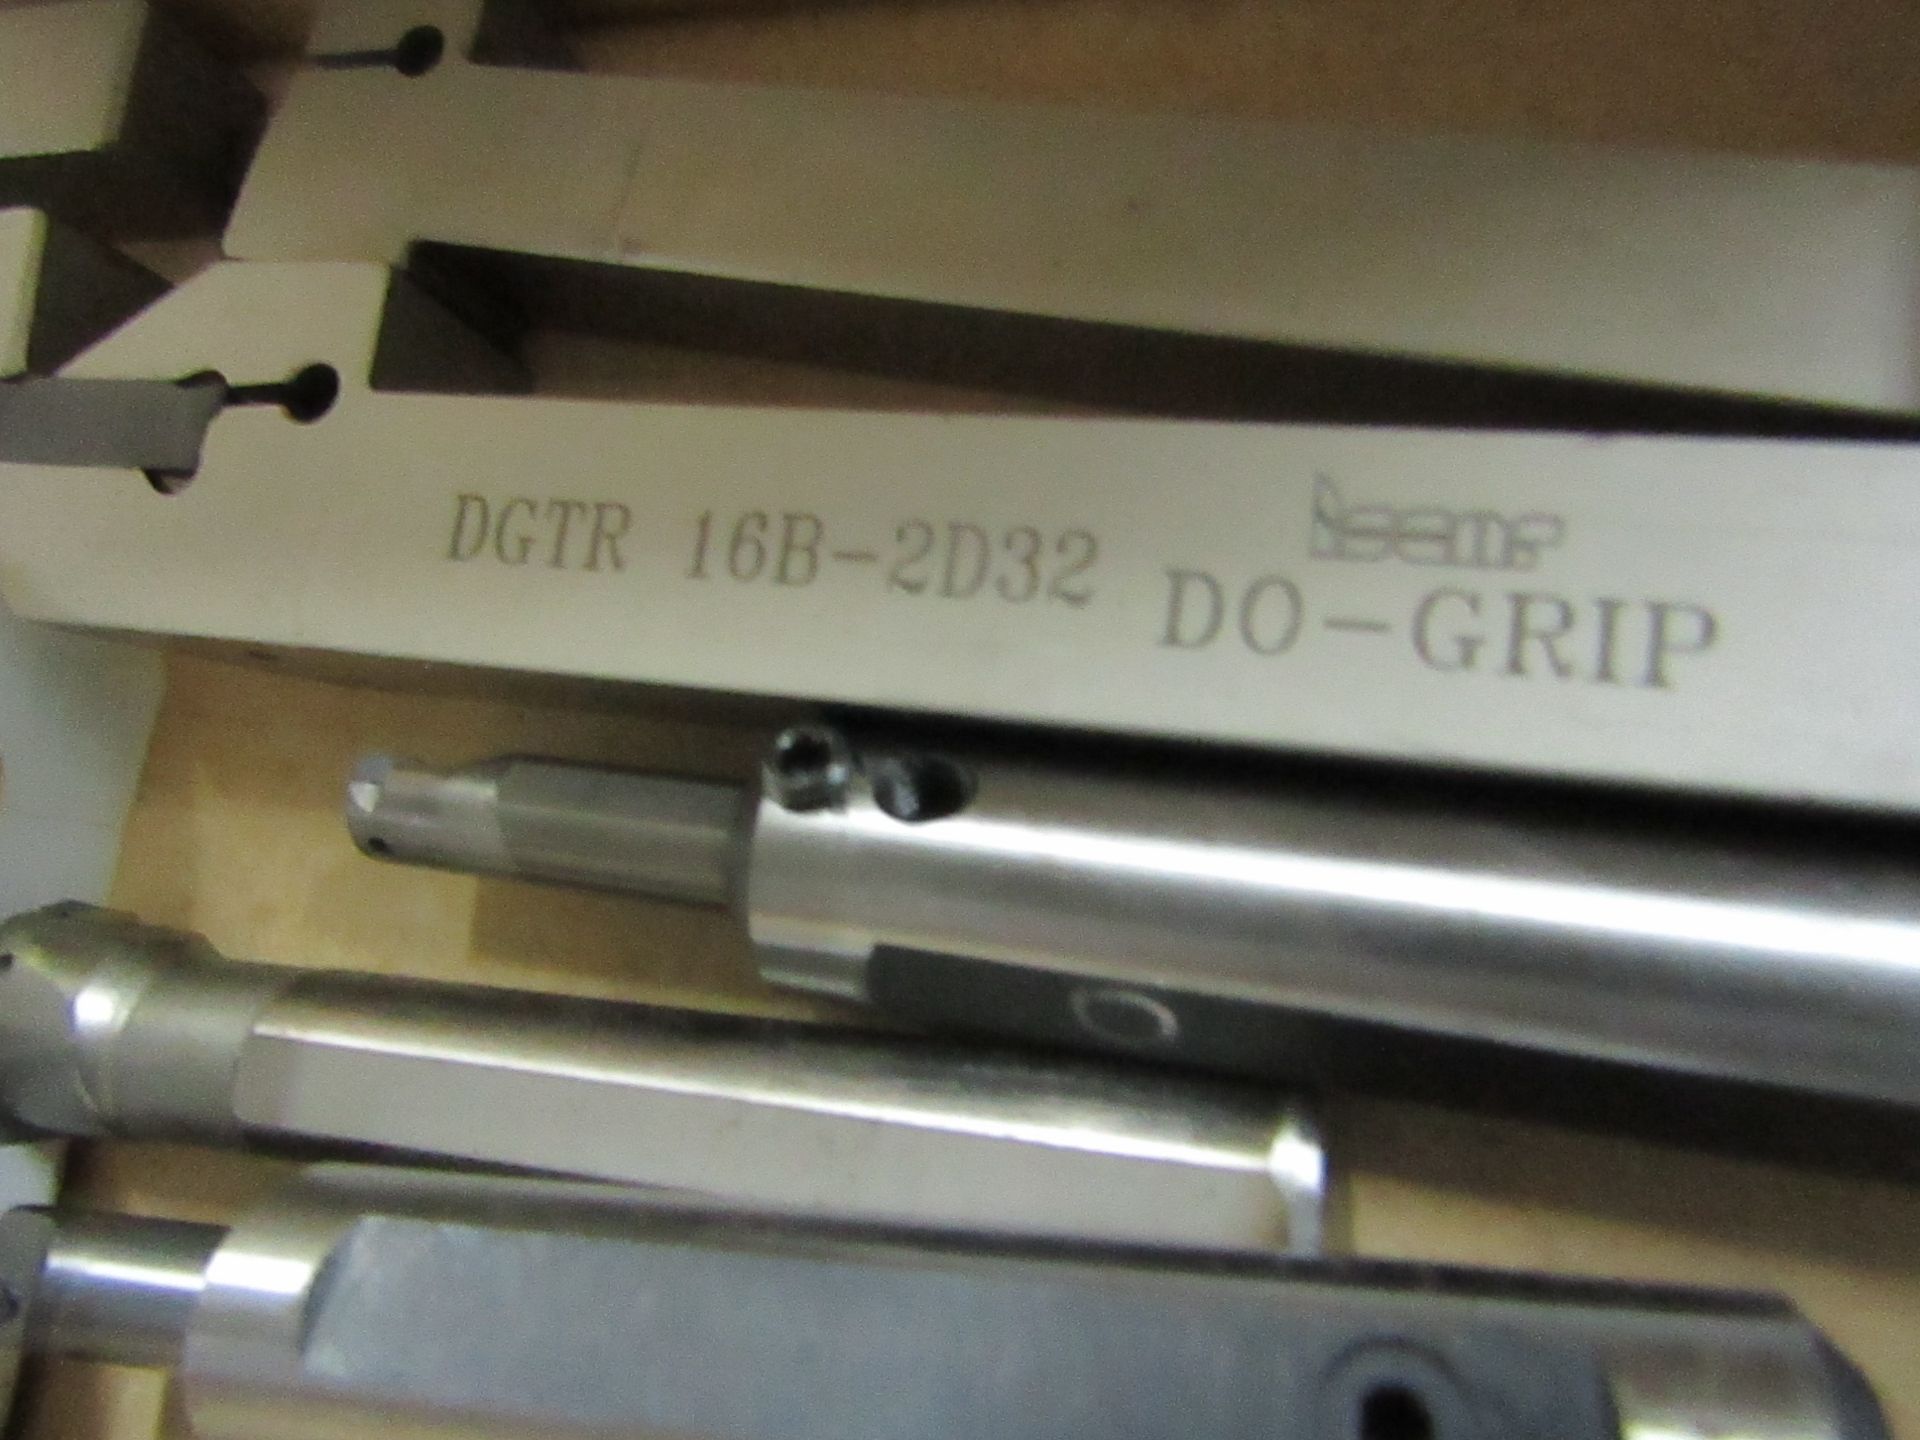 LOT TO INCLUDE: MISC. ISCAR TOOL HOLDERS, VARYING SIZES AND MODELS - Image 3 of 4